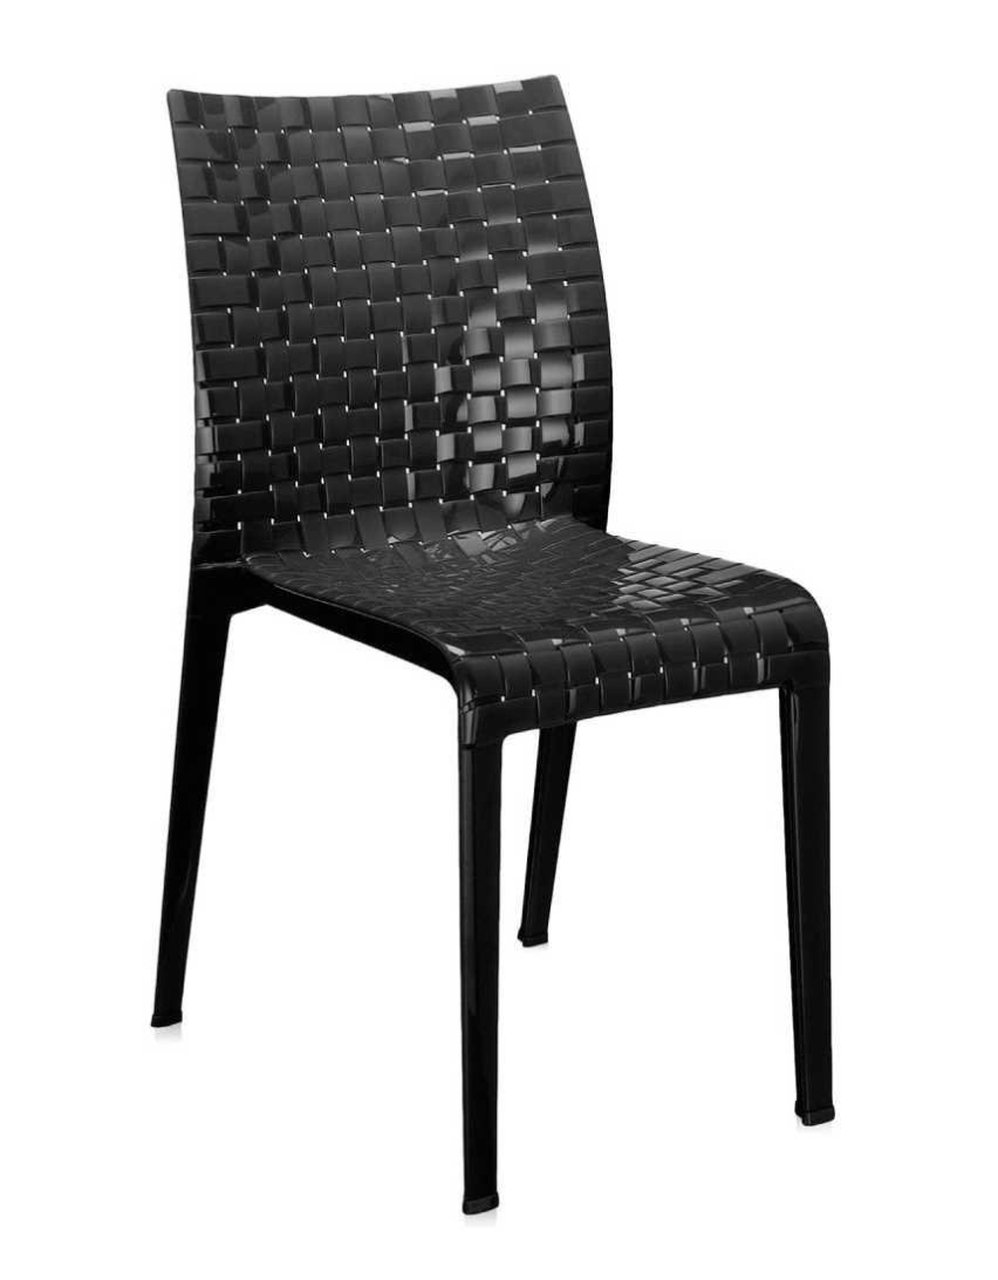 Image 2 of Kartel Ami Ami dining chairs (2 pieces)